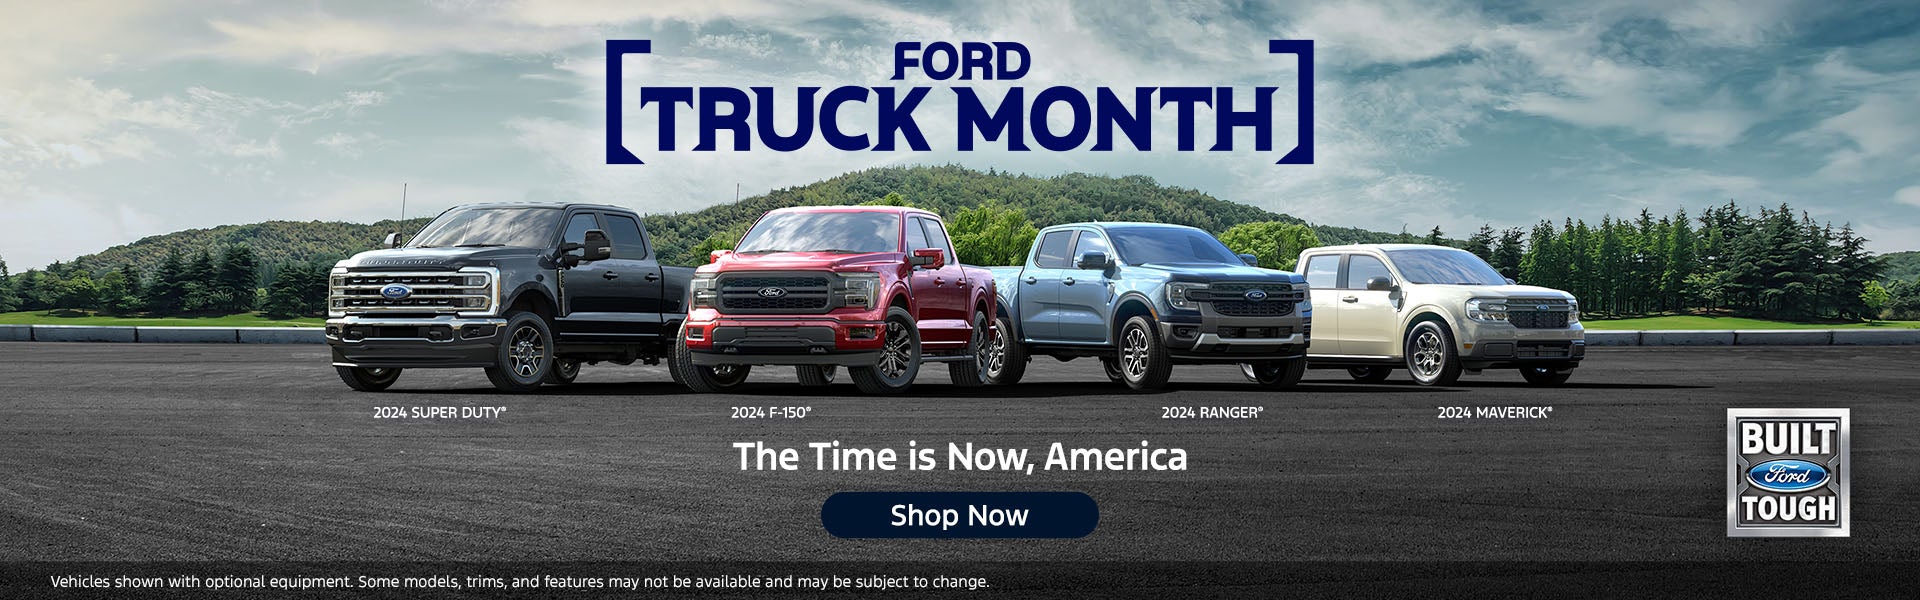 Ford Truck Month 